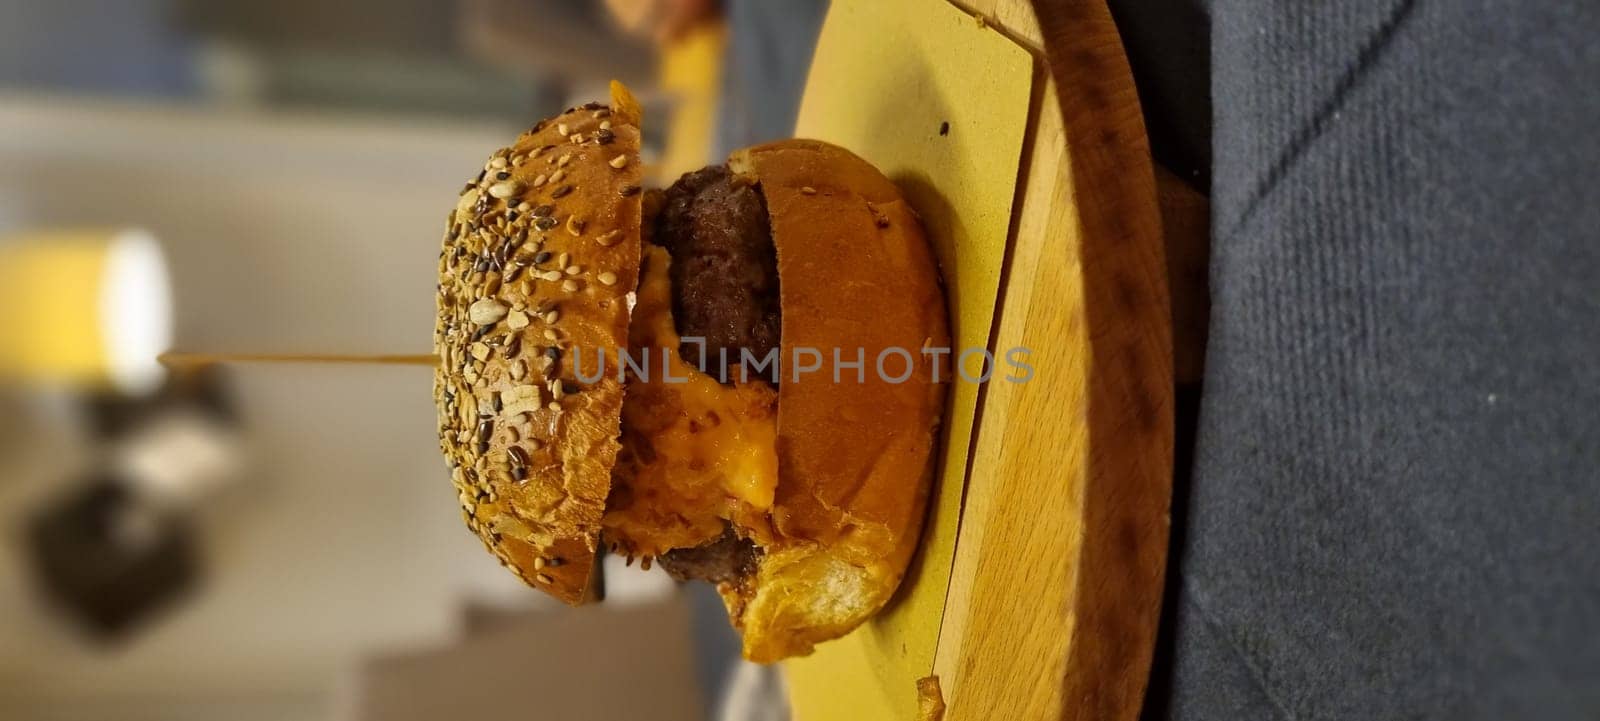 Side view of a delicious cheeseburger with sesame bun, on a rustic wooden serving board